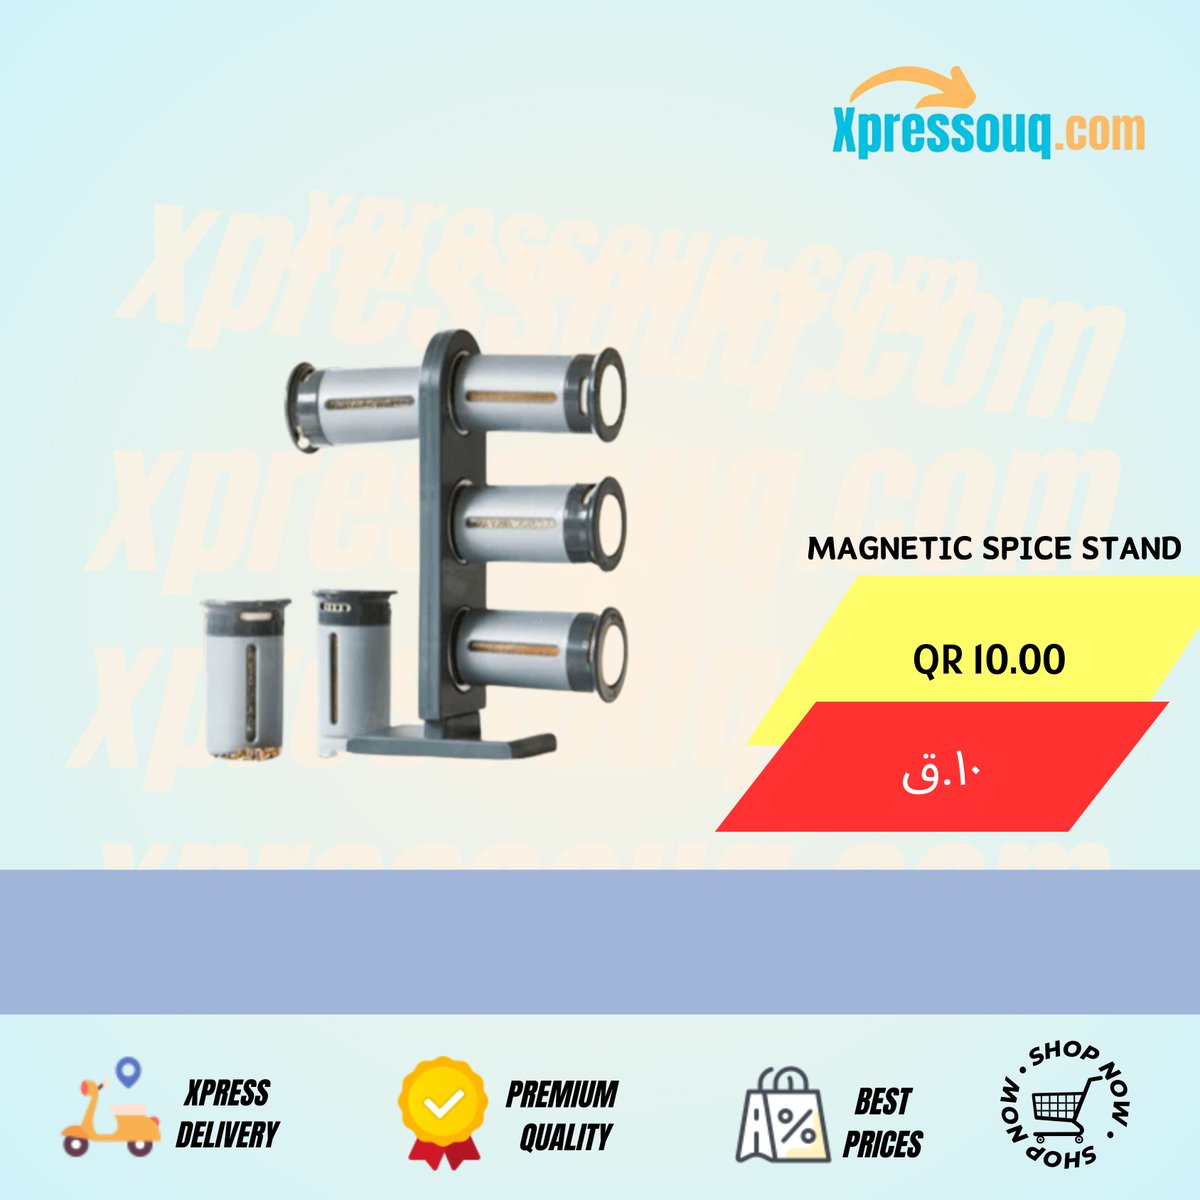 Spice up your kitchen! Magnetic Spice Stand 🌶️✨

🎯Order Now @ Just QR 10 only 🏃🏻‍
🚗xpress Delivery🛻
💸Cash on Delivery💸

xpressouq.com/products/magne…

#SpiceOrganizationQatar #KitchenStorage #MagneticSpiceRack #QatarHome #KitchenOrganization #SpiceLoversQatar #CookingEssentials